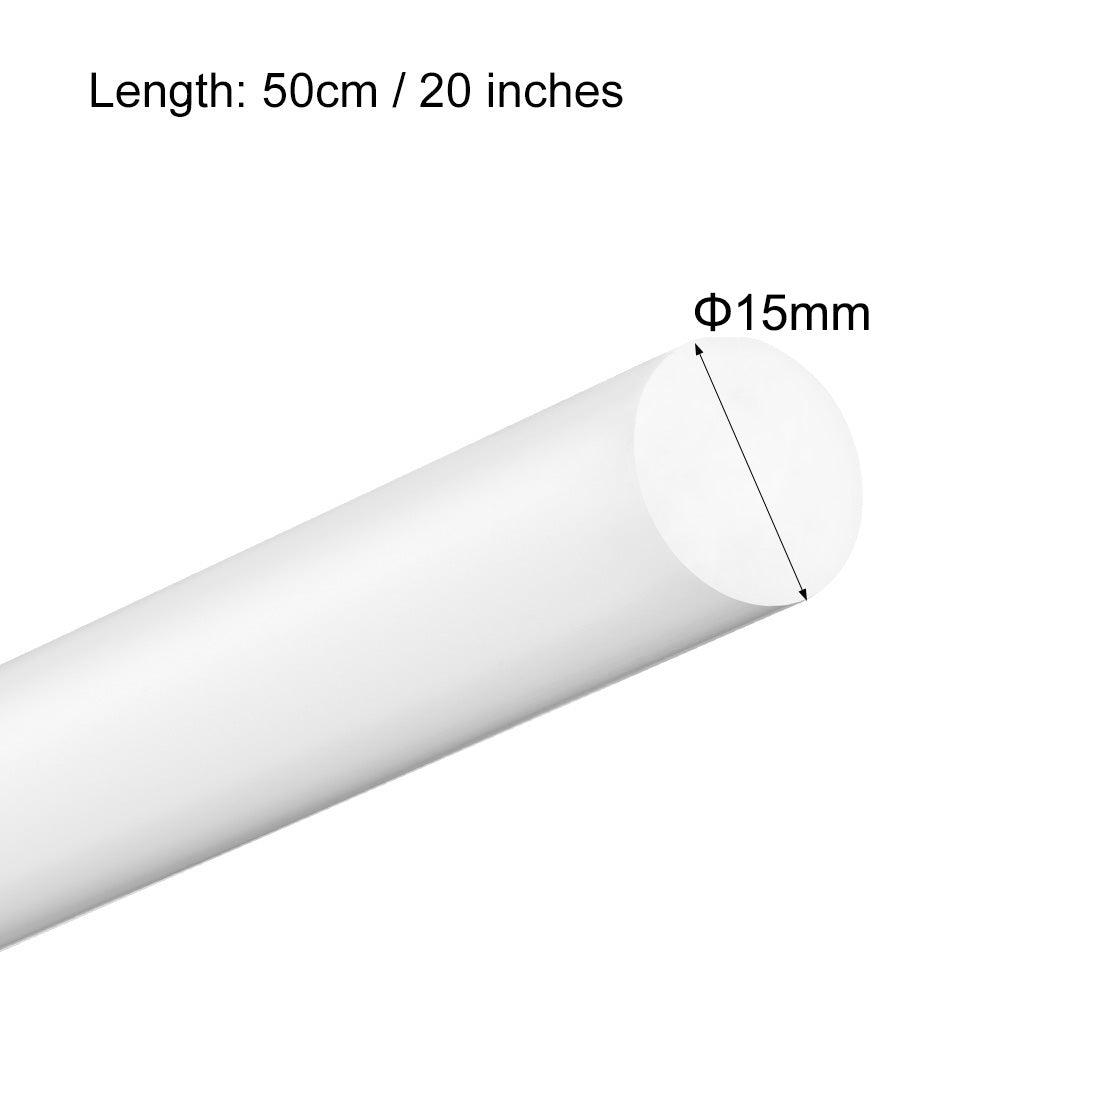 uxcell Uxcell Plastic Round Rod,15mm Dia 50cm White Engineering Plastic Round Bar 3pcs